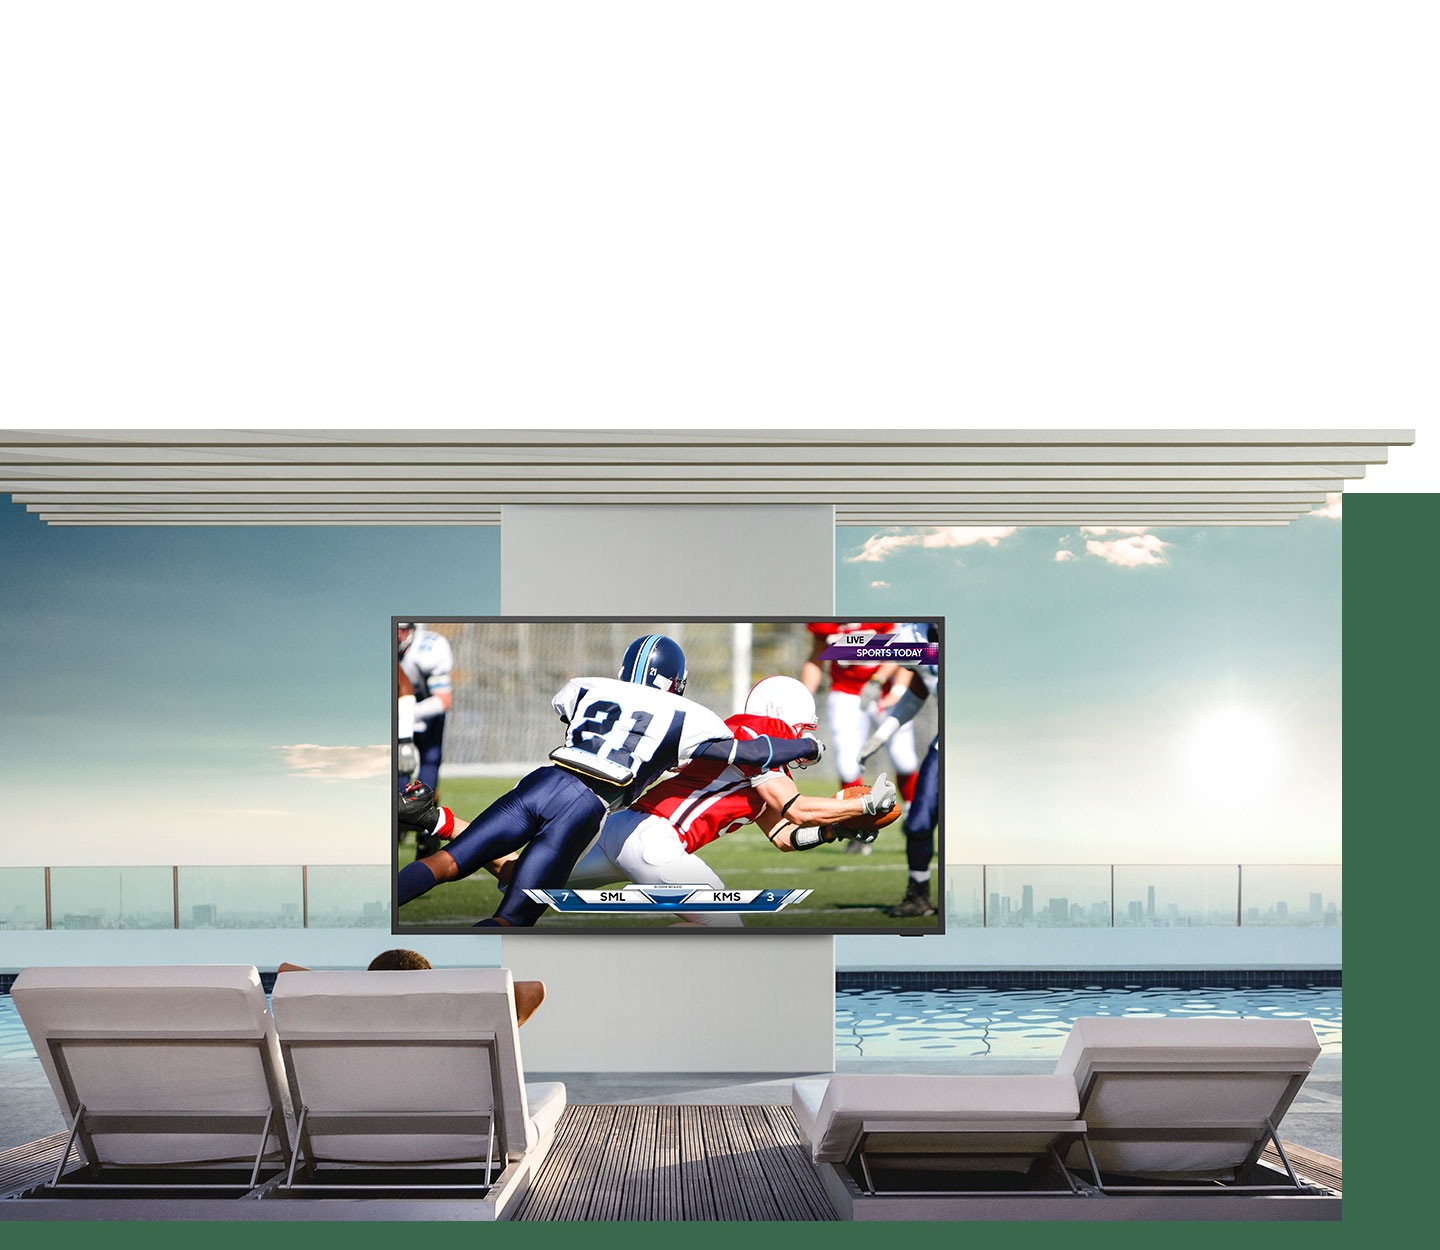 Bright and bright: 4K QLED outdoor TV